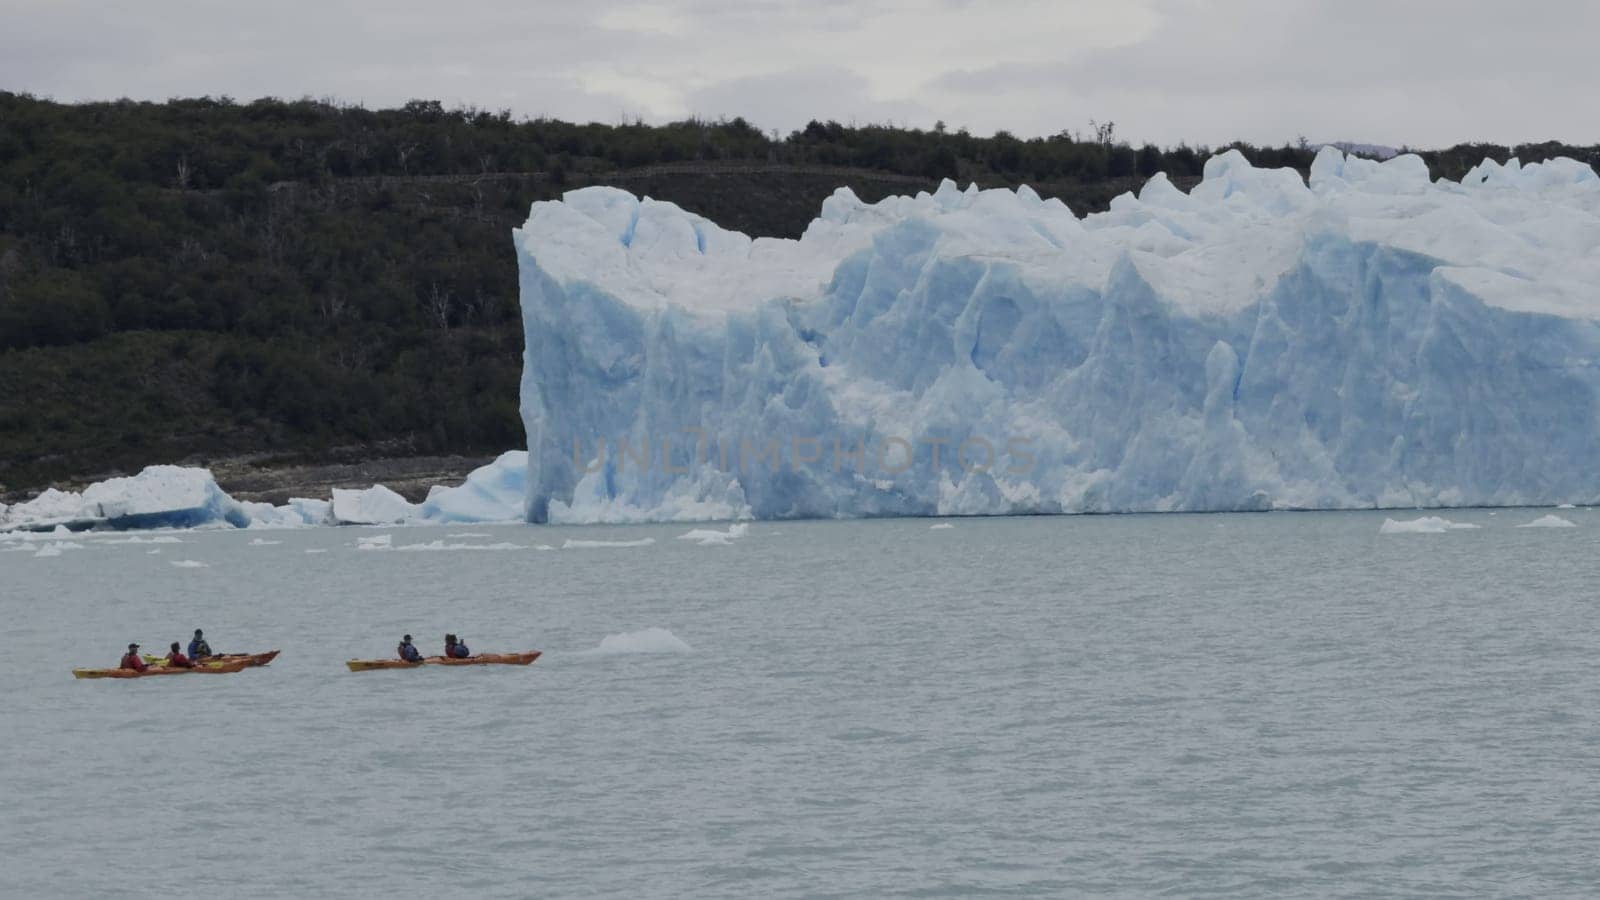 Kayakers Approaching the Majestic Perito Moreno Glacier Slowly by FerradalFCG